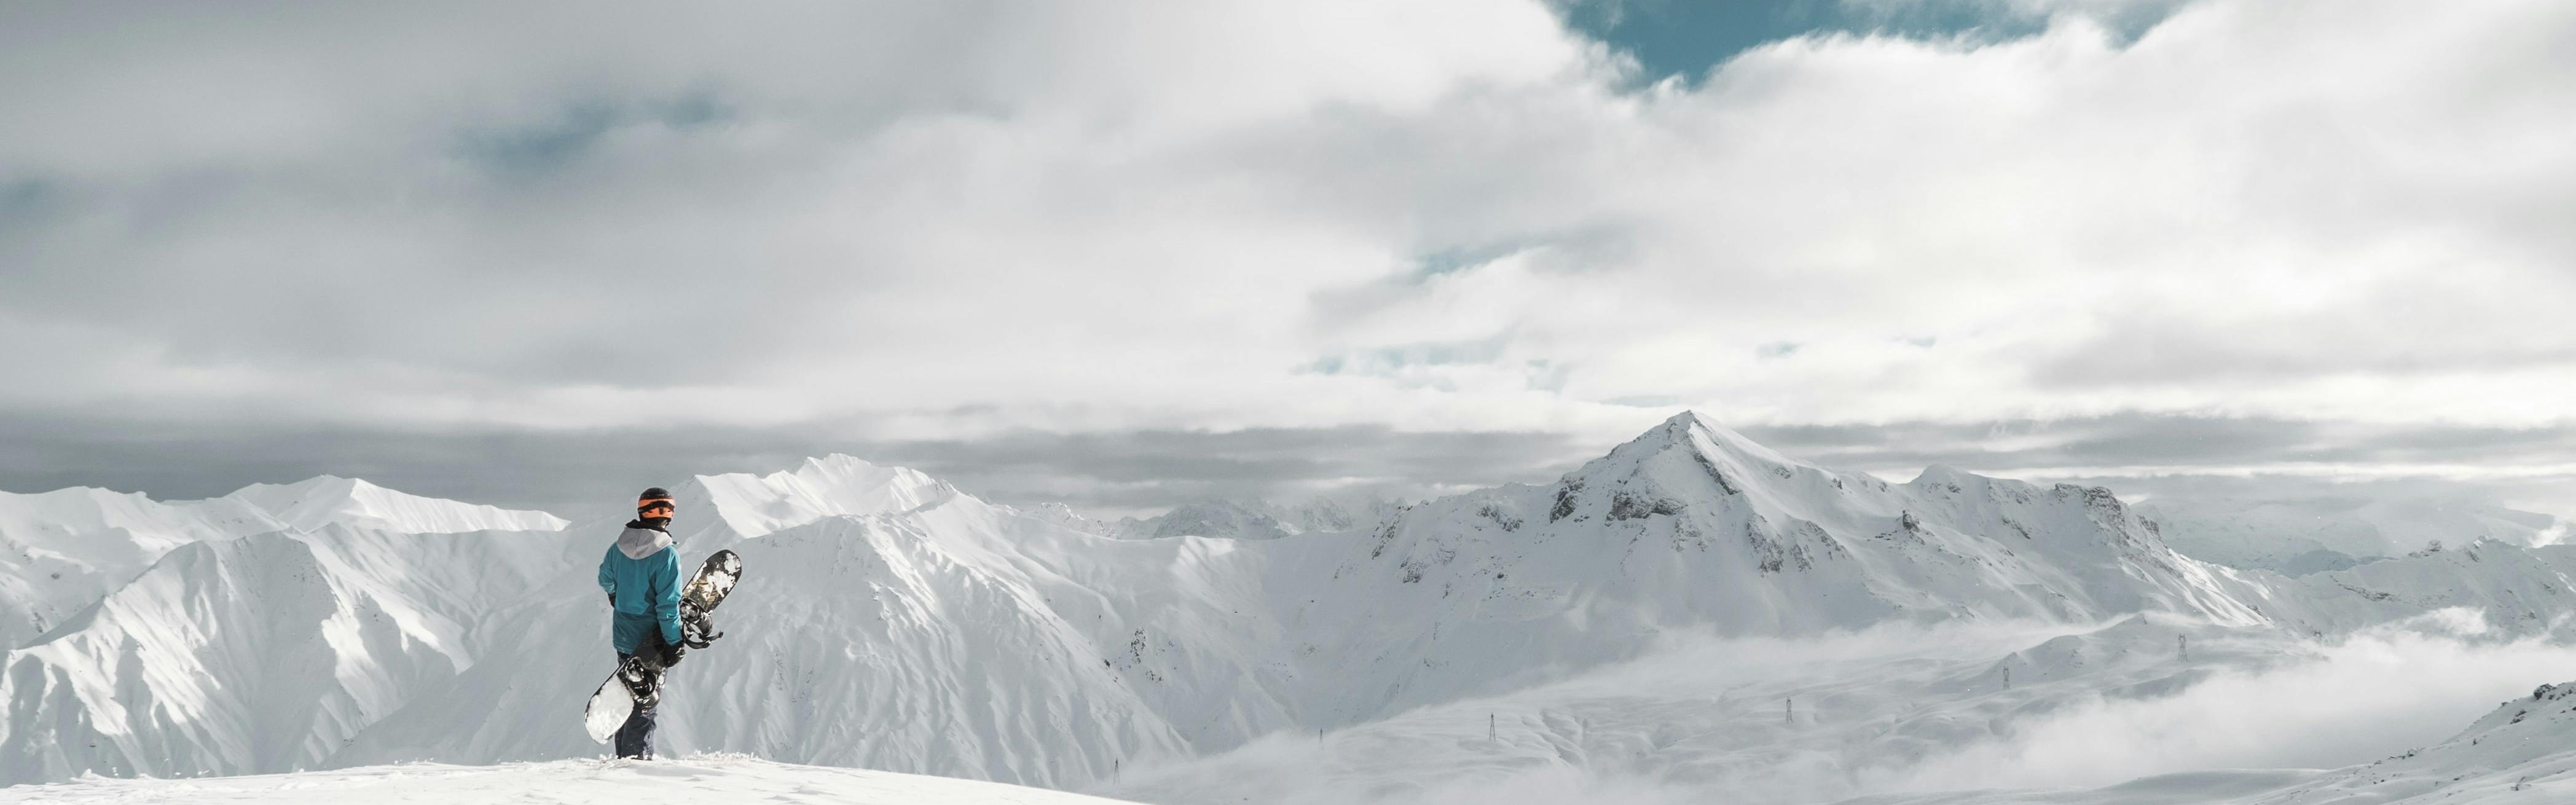 A snowboarder stands with his board on top of a snowy mountain range.